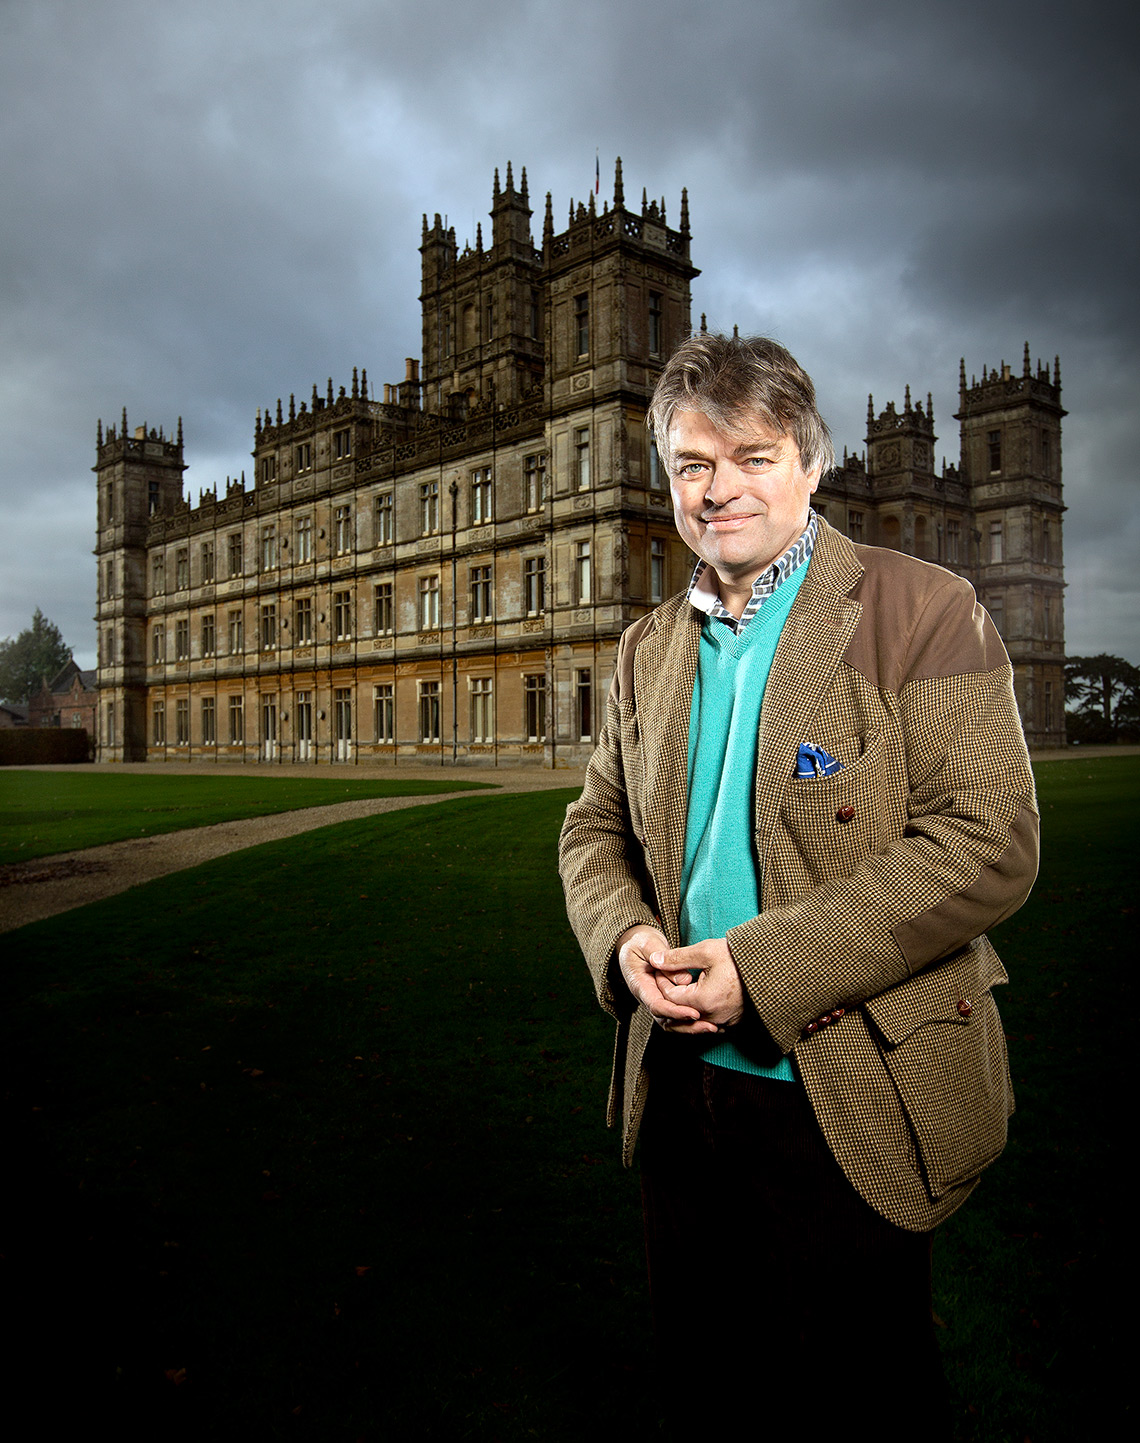 Environmental portrait of Lord Carnarvon outside Highclere Castle the setting for Downton Abbey.